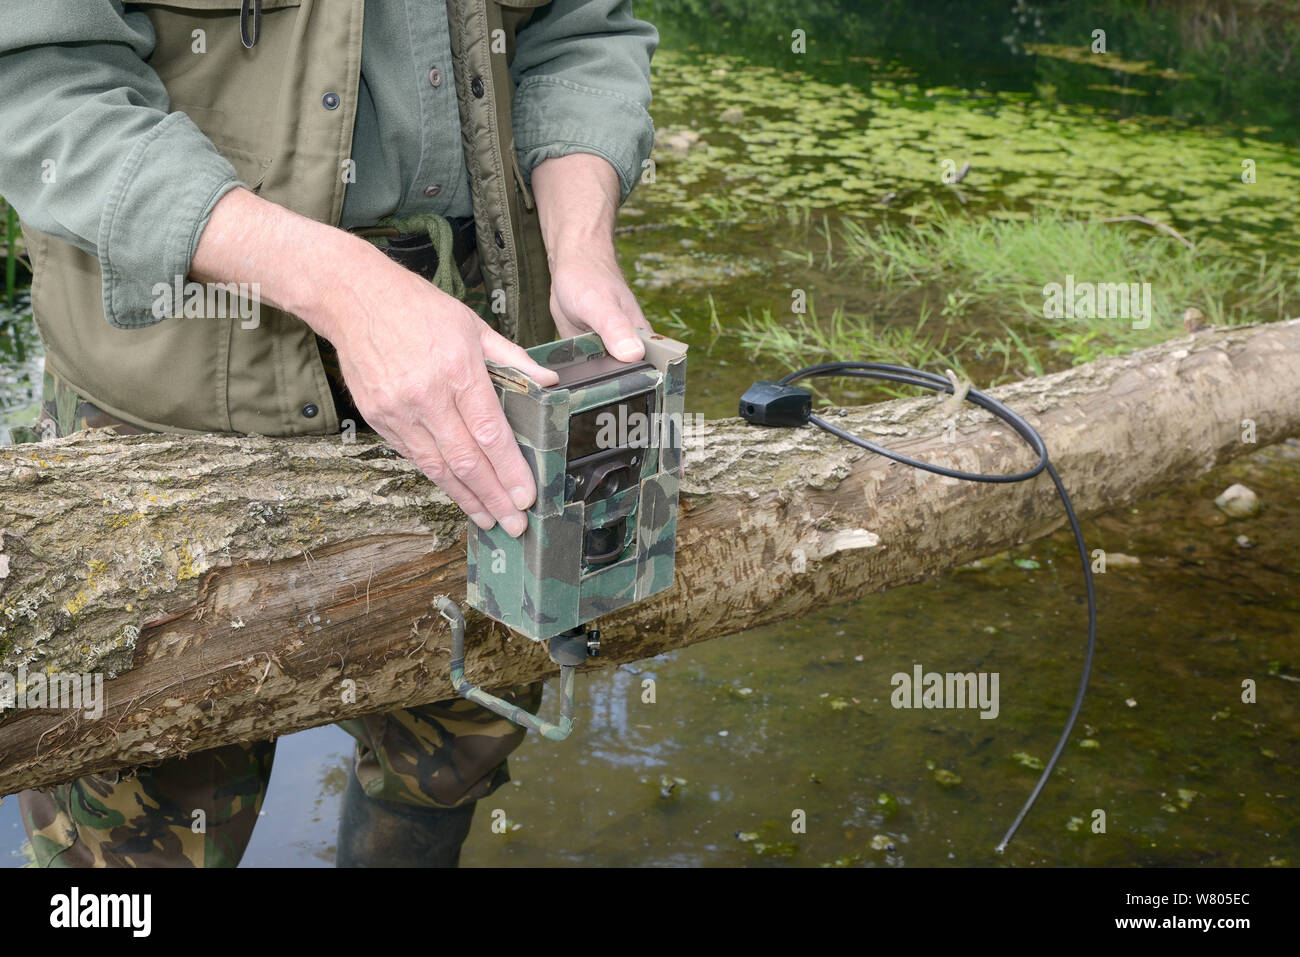 Tom Buckley setting up an infra red trailcam on a Willow tree (Salix sp.) felled by Eurasian beavers (Castor fiber) on the banks of the River Otter, Devon, England, UK, May. Model released. Stock Photo